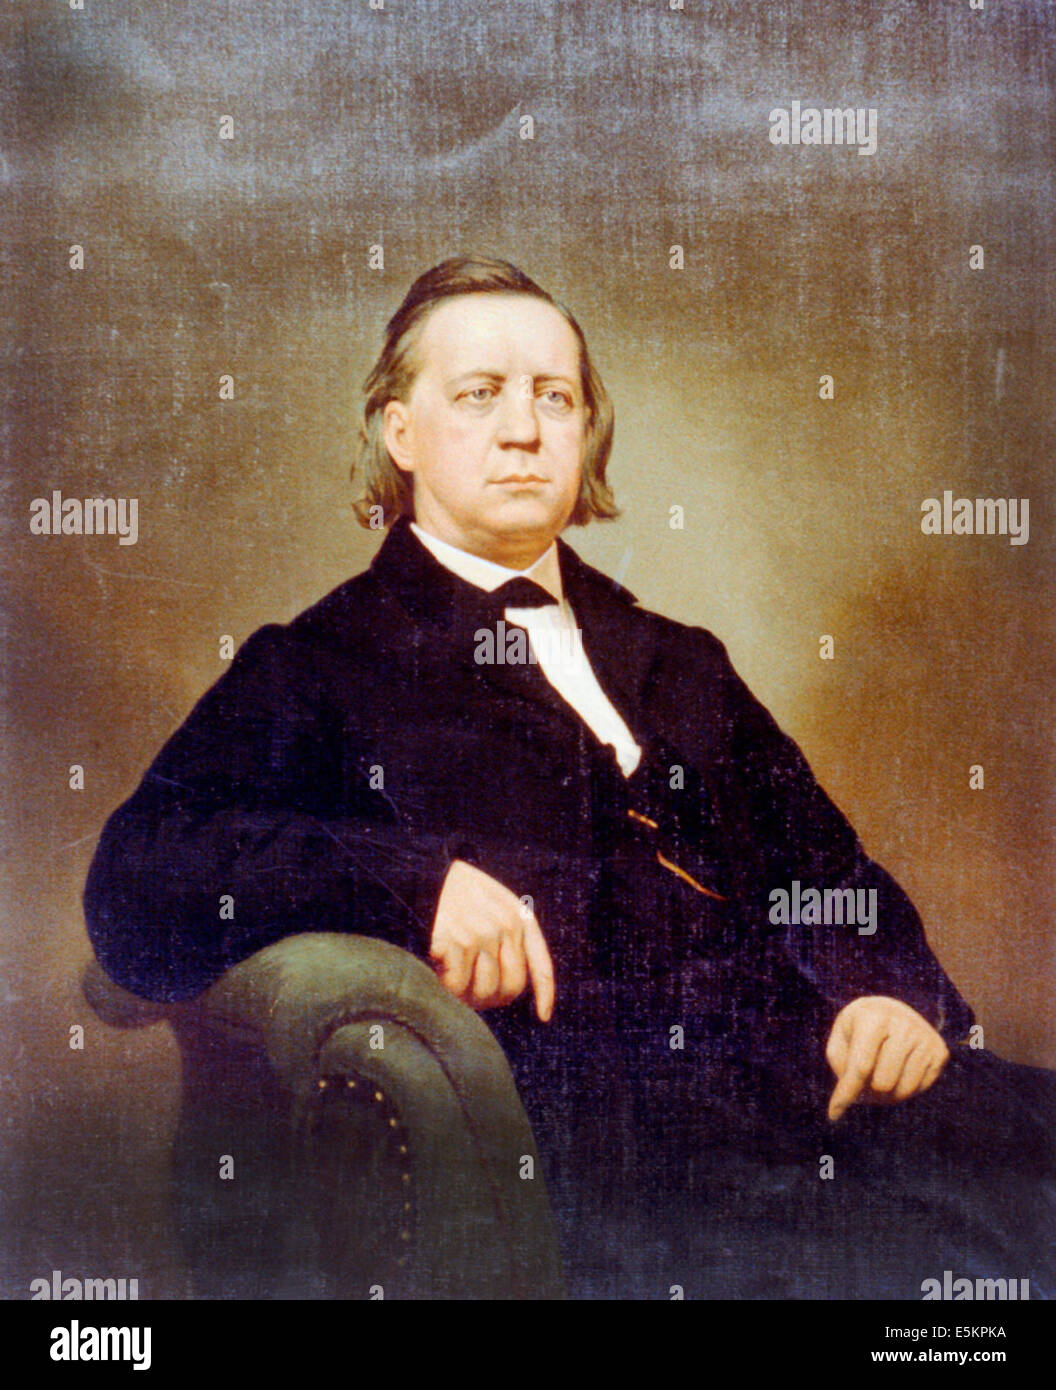 Henry Ward Beecher (June 24, 1813 – March 8, 1887) was an American Congregationalist clergyman, social reformer, and speaker, known for his support of the abolition of slavery, his emphasis on God's love, and his 1875 adultery trial. Stock Photo